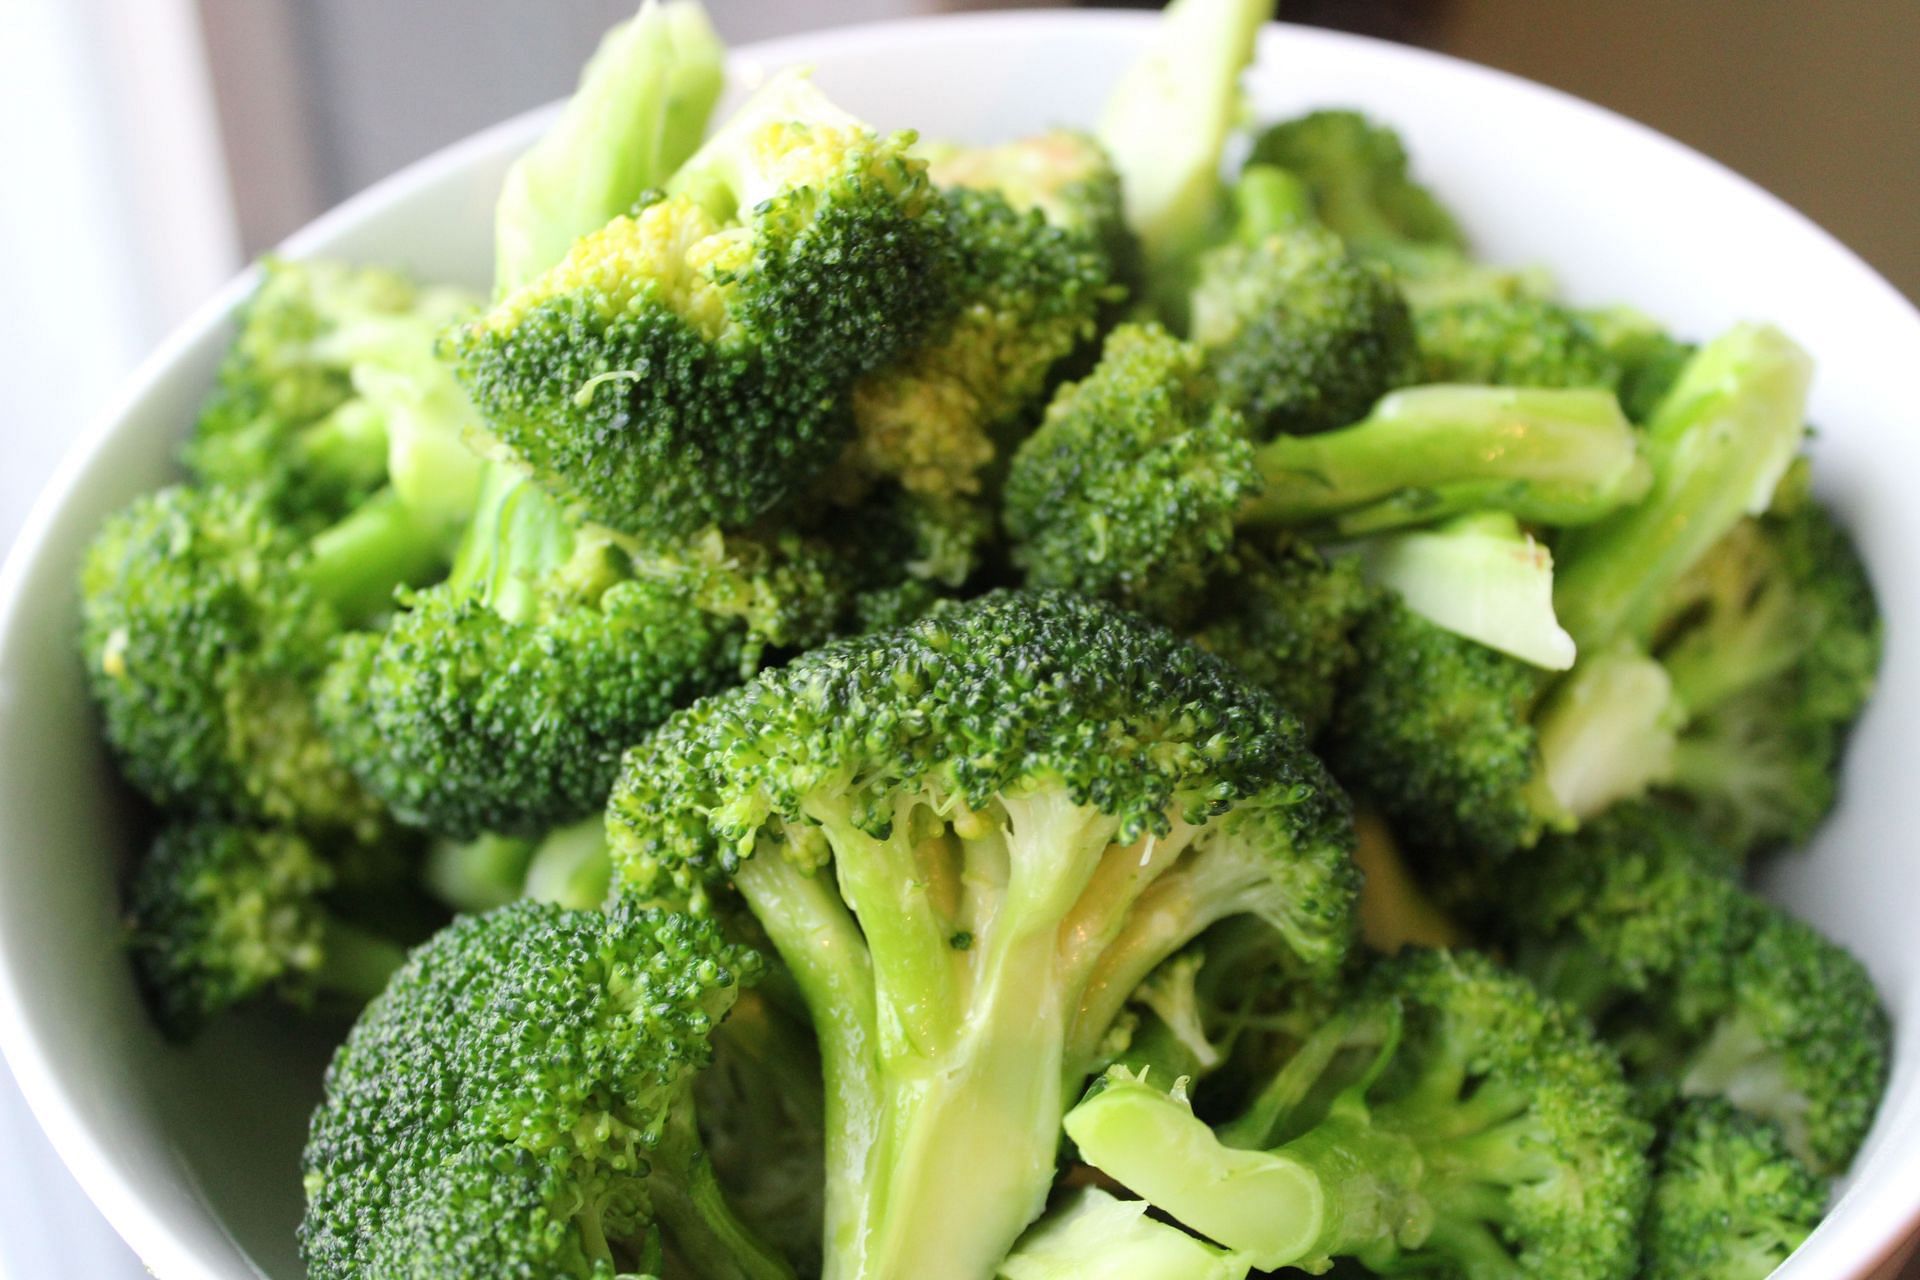 Broccoli is a superfood (Image via Unsplash/Tyrell Fitness and Nutrition)